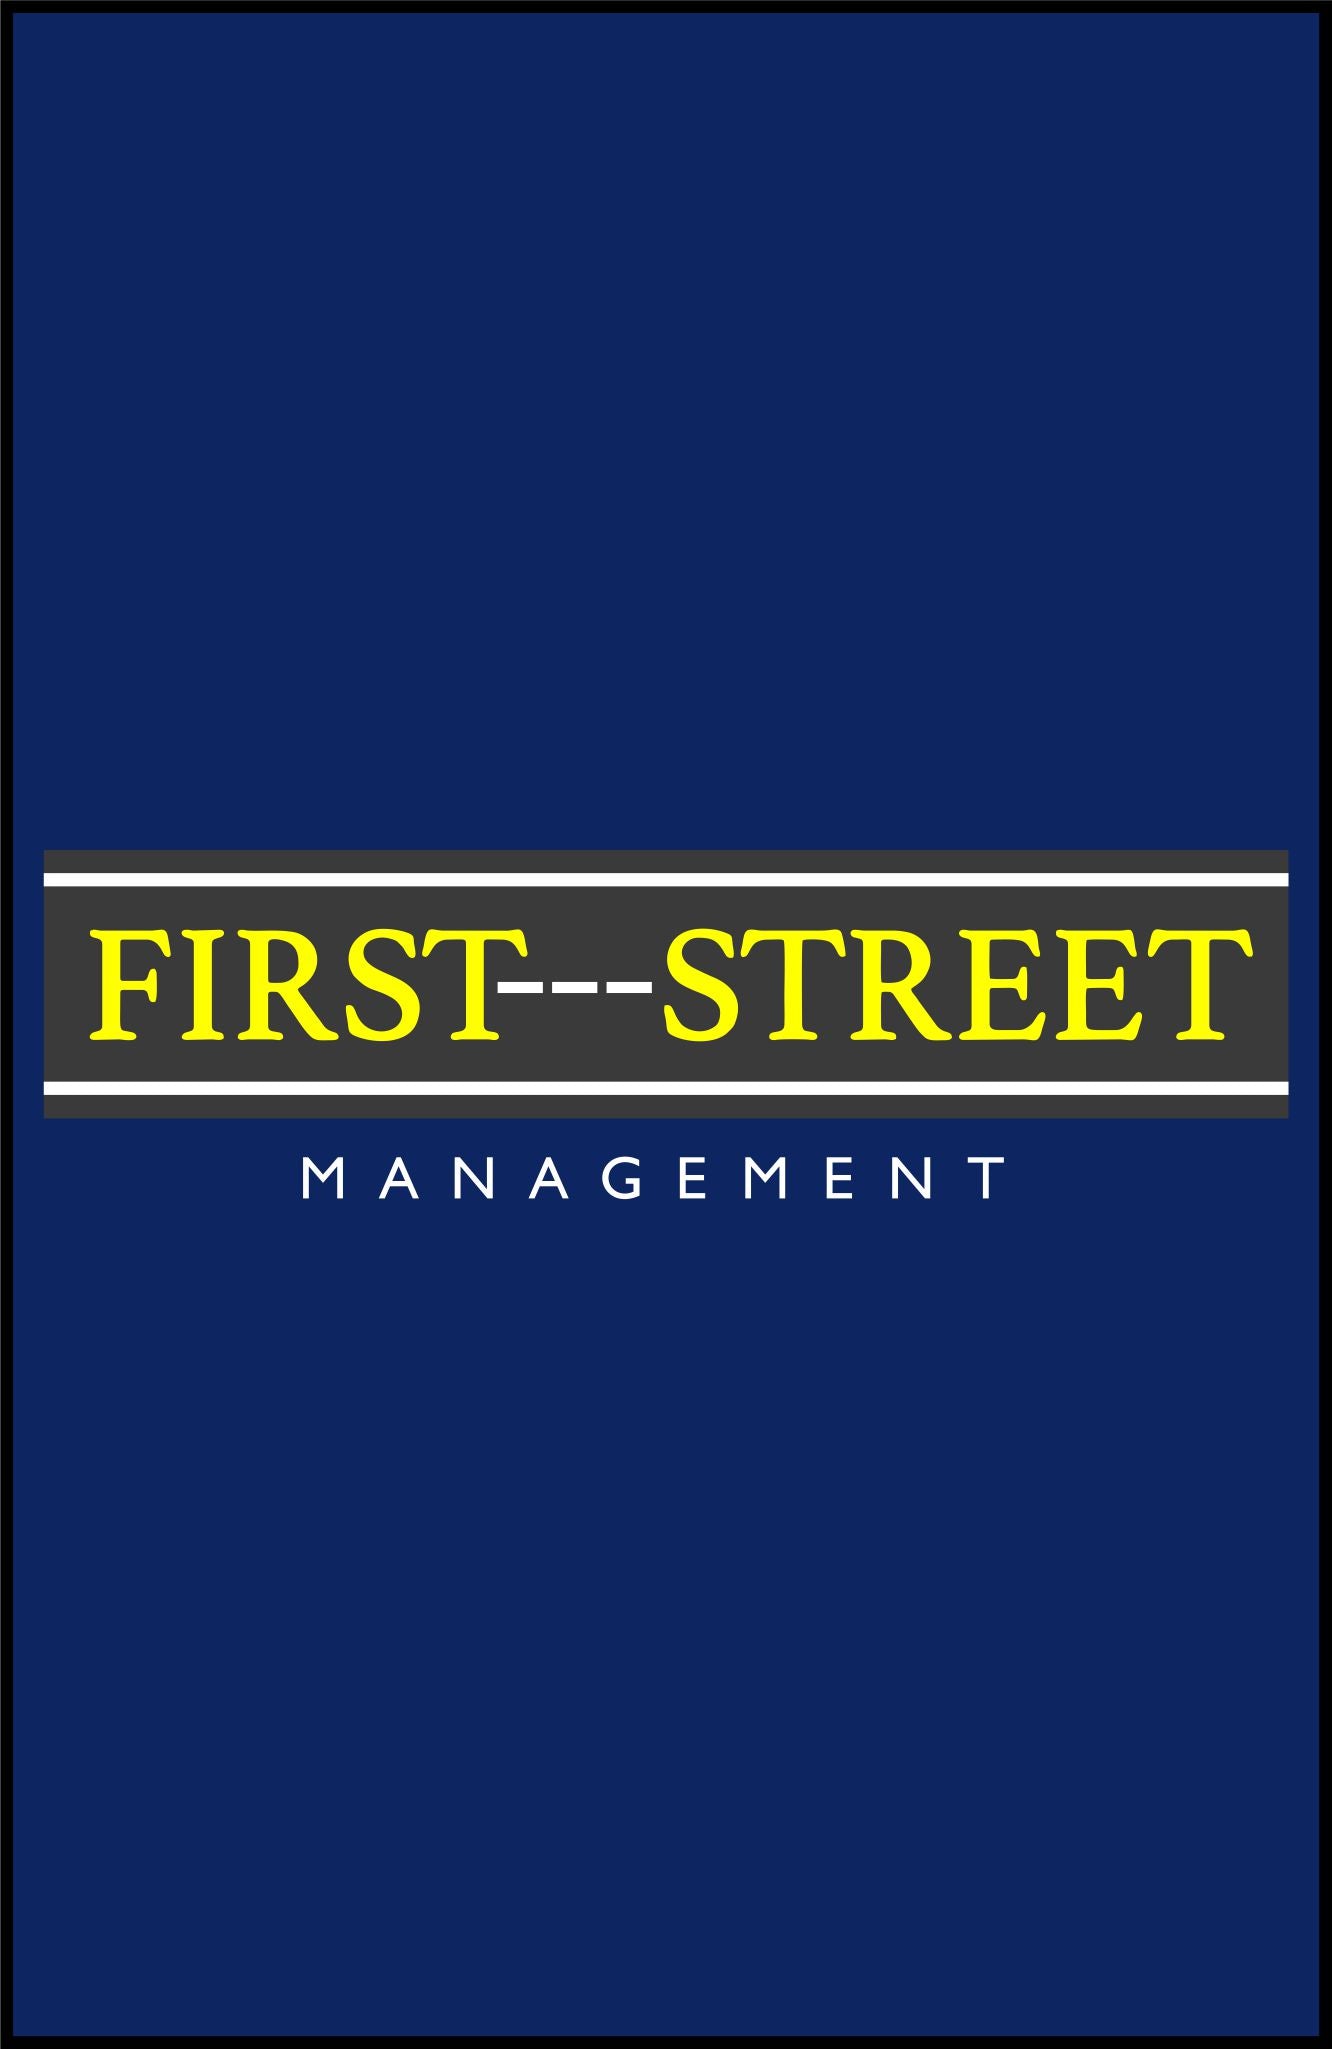 First Street Management 13 X 20 Luxury Berber Inlay - The Personalized Doormats Company